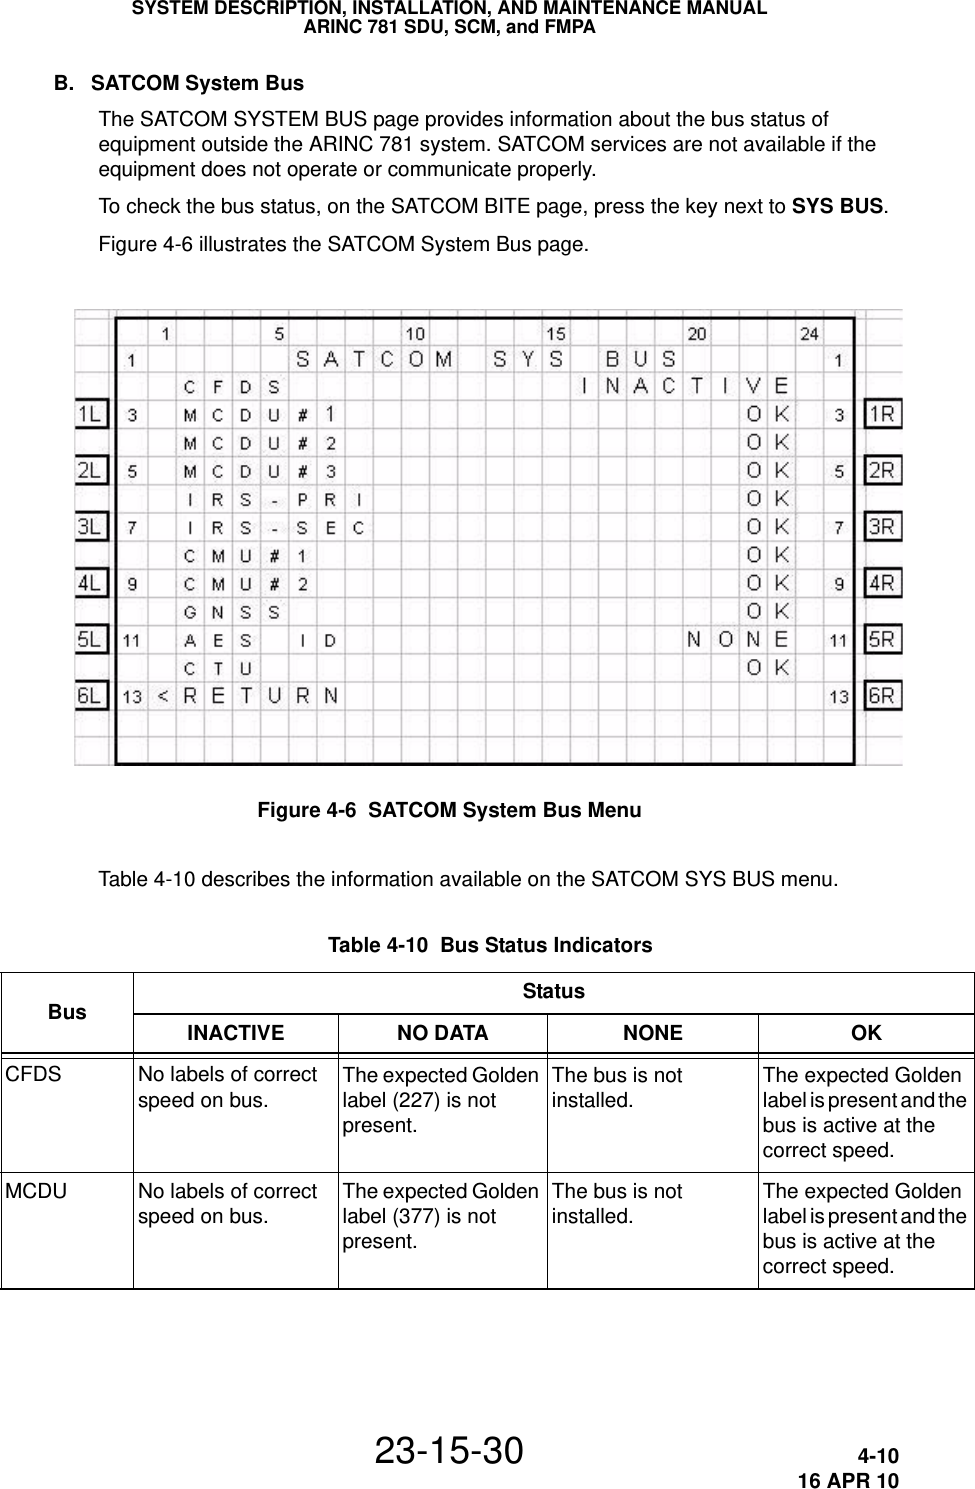 SYSTEM DESCRIPTION, INSTALLATION, AND MAINTENANCE MANUALARINC 781 SDU, SCM, and FMPA23-15-30 4-1016 APR 10B. SATCOM System BusThe SATCOM SYSTEM BUS page provides information about the bus status of equipment outside the ARINC 781 system. SATCOM services are not available if the equipment does not operate or communicate properly.To check the bus status, on the SATCOM BITE page, press the key next to SYS BUS.Figure 4-6 illustrates the SATCOM System Bus page.Figure 4-6  SATCOM System Bus MenuTable 4-10 describes the information available on the SATCOM SYS BUS menu. Table 4-10  Bus Status IndicatorsBusStatusINACTIVE NO DATA NONE OKCFDS No labels of correct speed on bus.The expected Golden label (227) is not present.The bus is not installed.The expected Golden label is present and the bus is active at the correct speed.MCDU No labels of correct speed on bus.The expected Golden label (377) is not present.The bus is not installed.The expected Golden label is present and the bus is active at the correct speed.